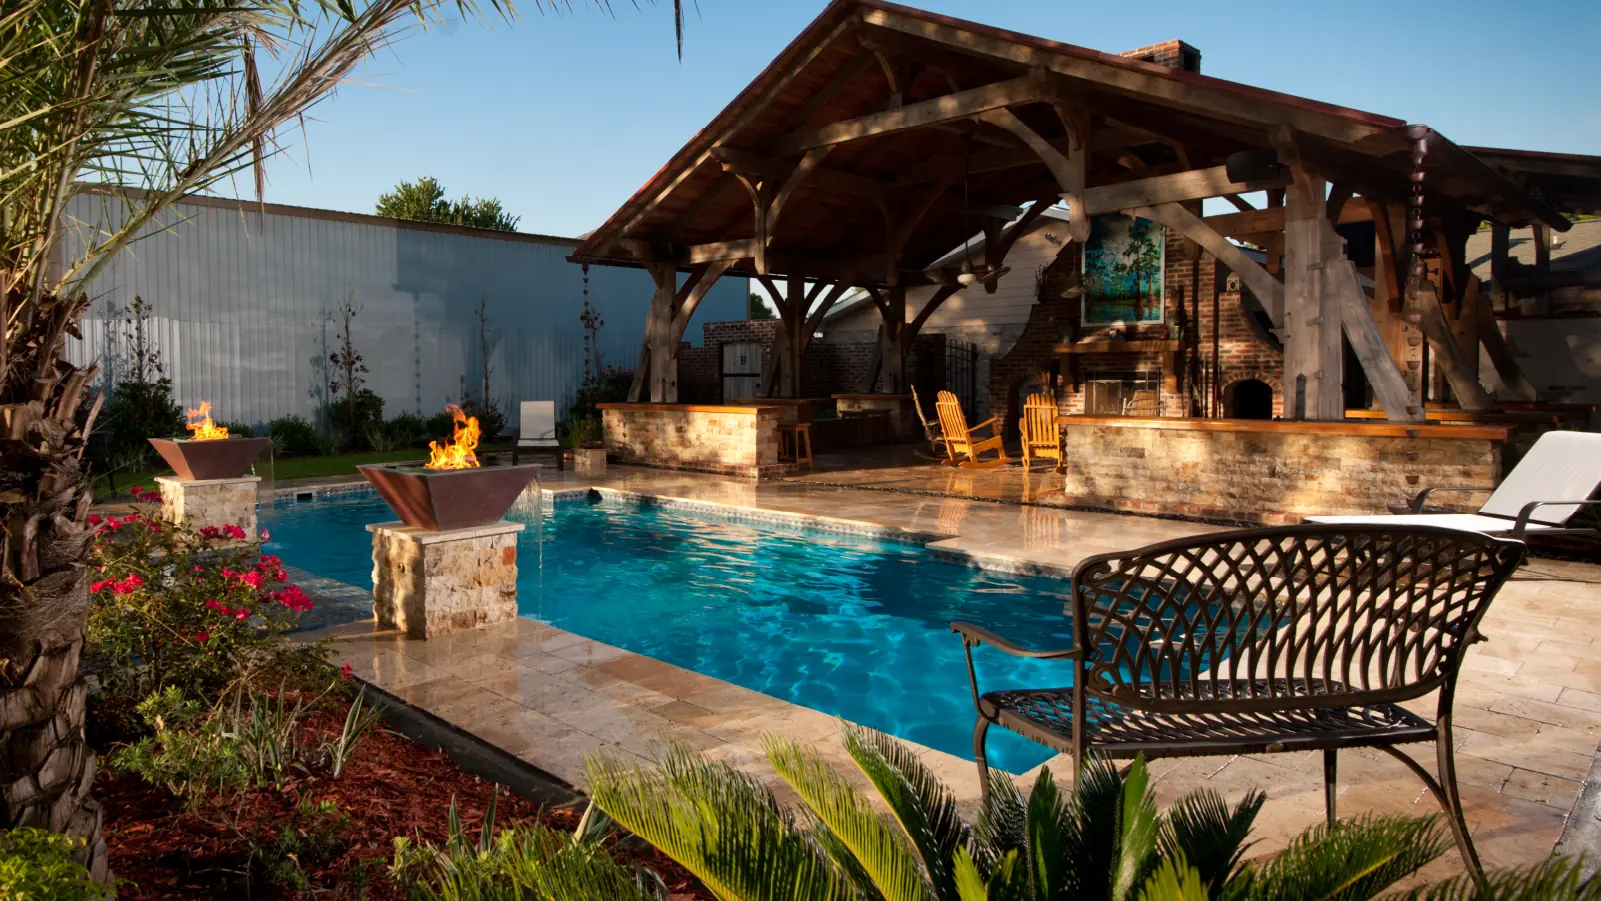 Choosing the Right Features for Your Backyard Fiberglass Pool